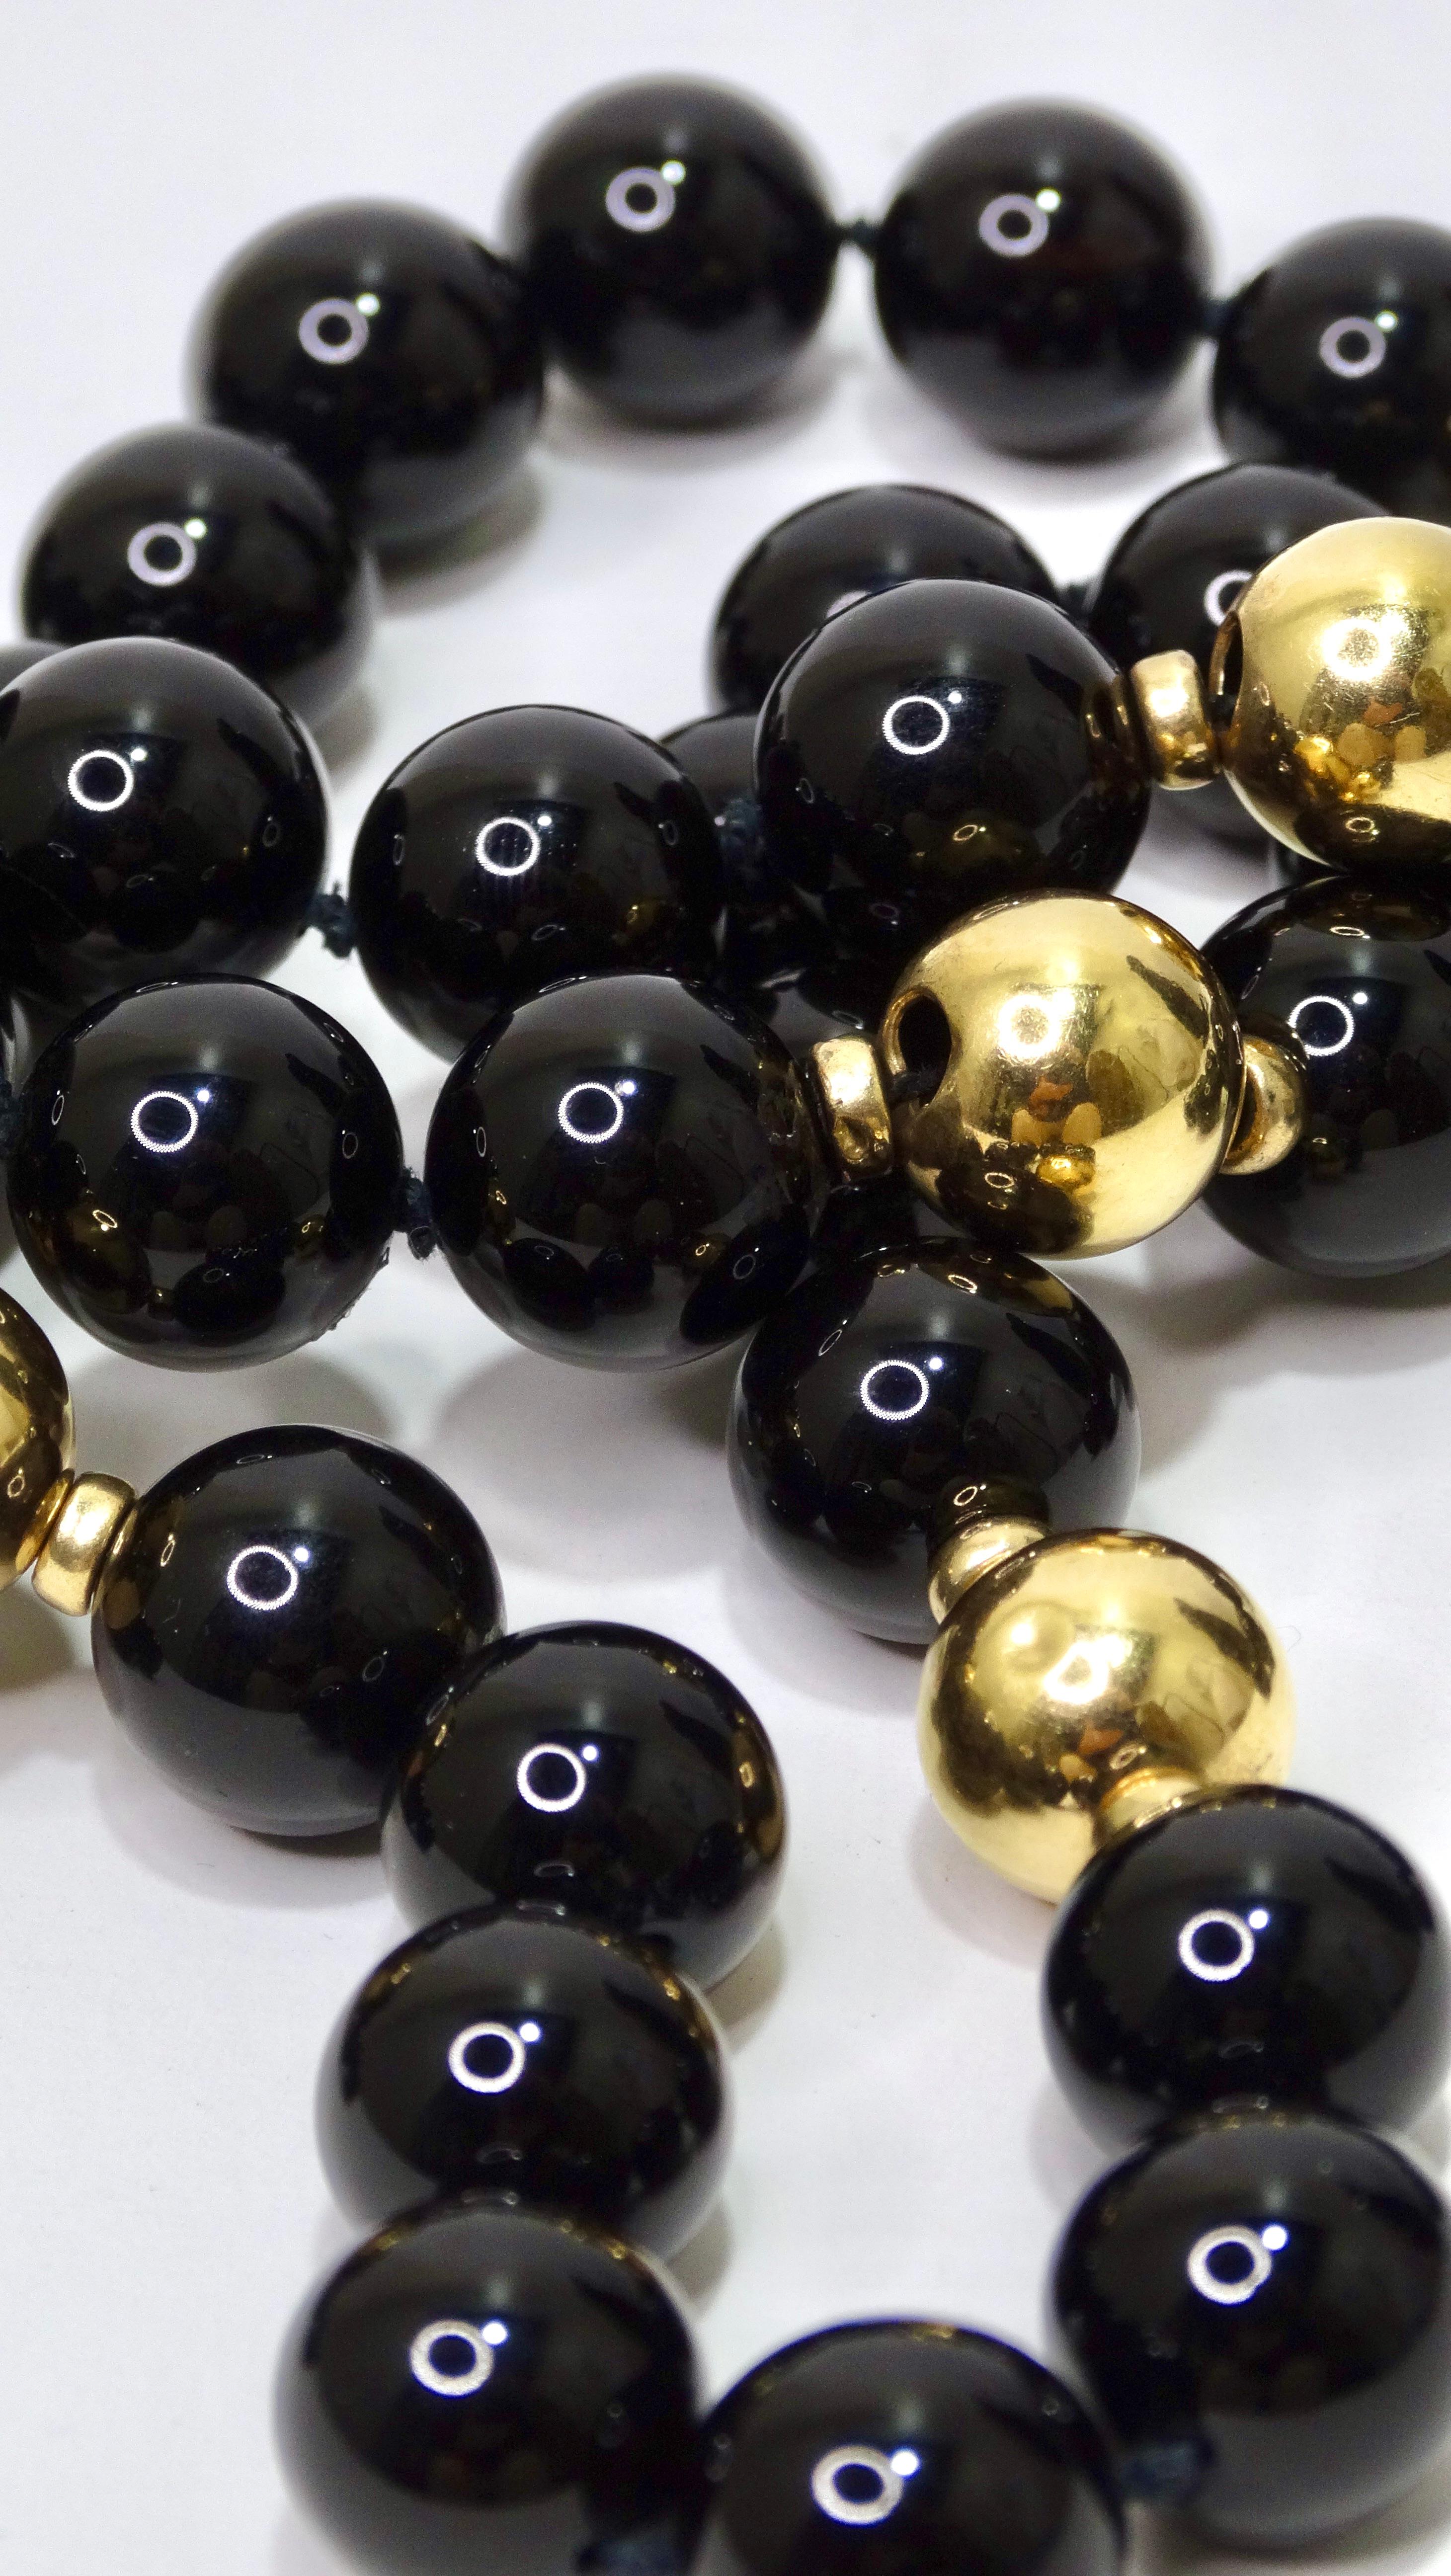 This crafted necklace is made of a mix of black Onyx and 14k gold that contrasts beautifully. A beaded necklace has many possibilities for styling as it can be styled as a single-layer or double-layer. Wear with a vintage Prada maxi dress and some